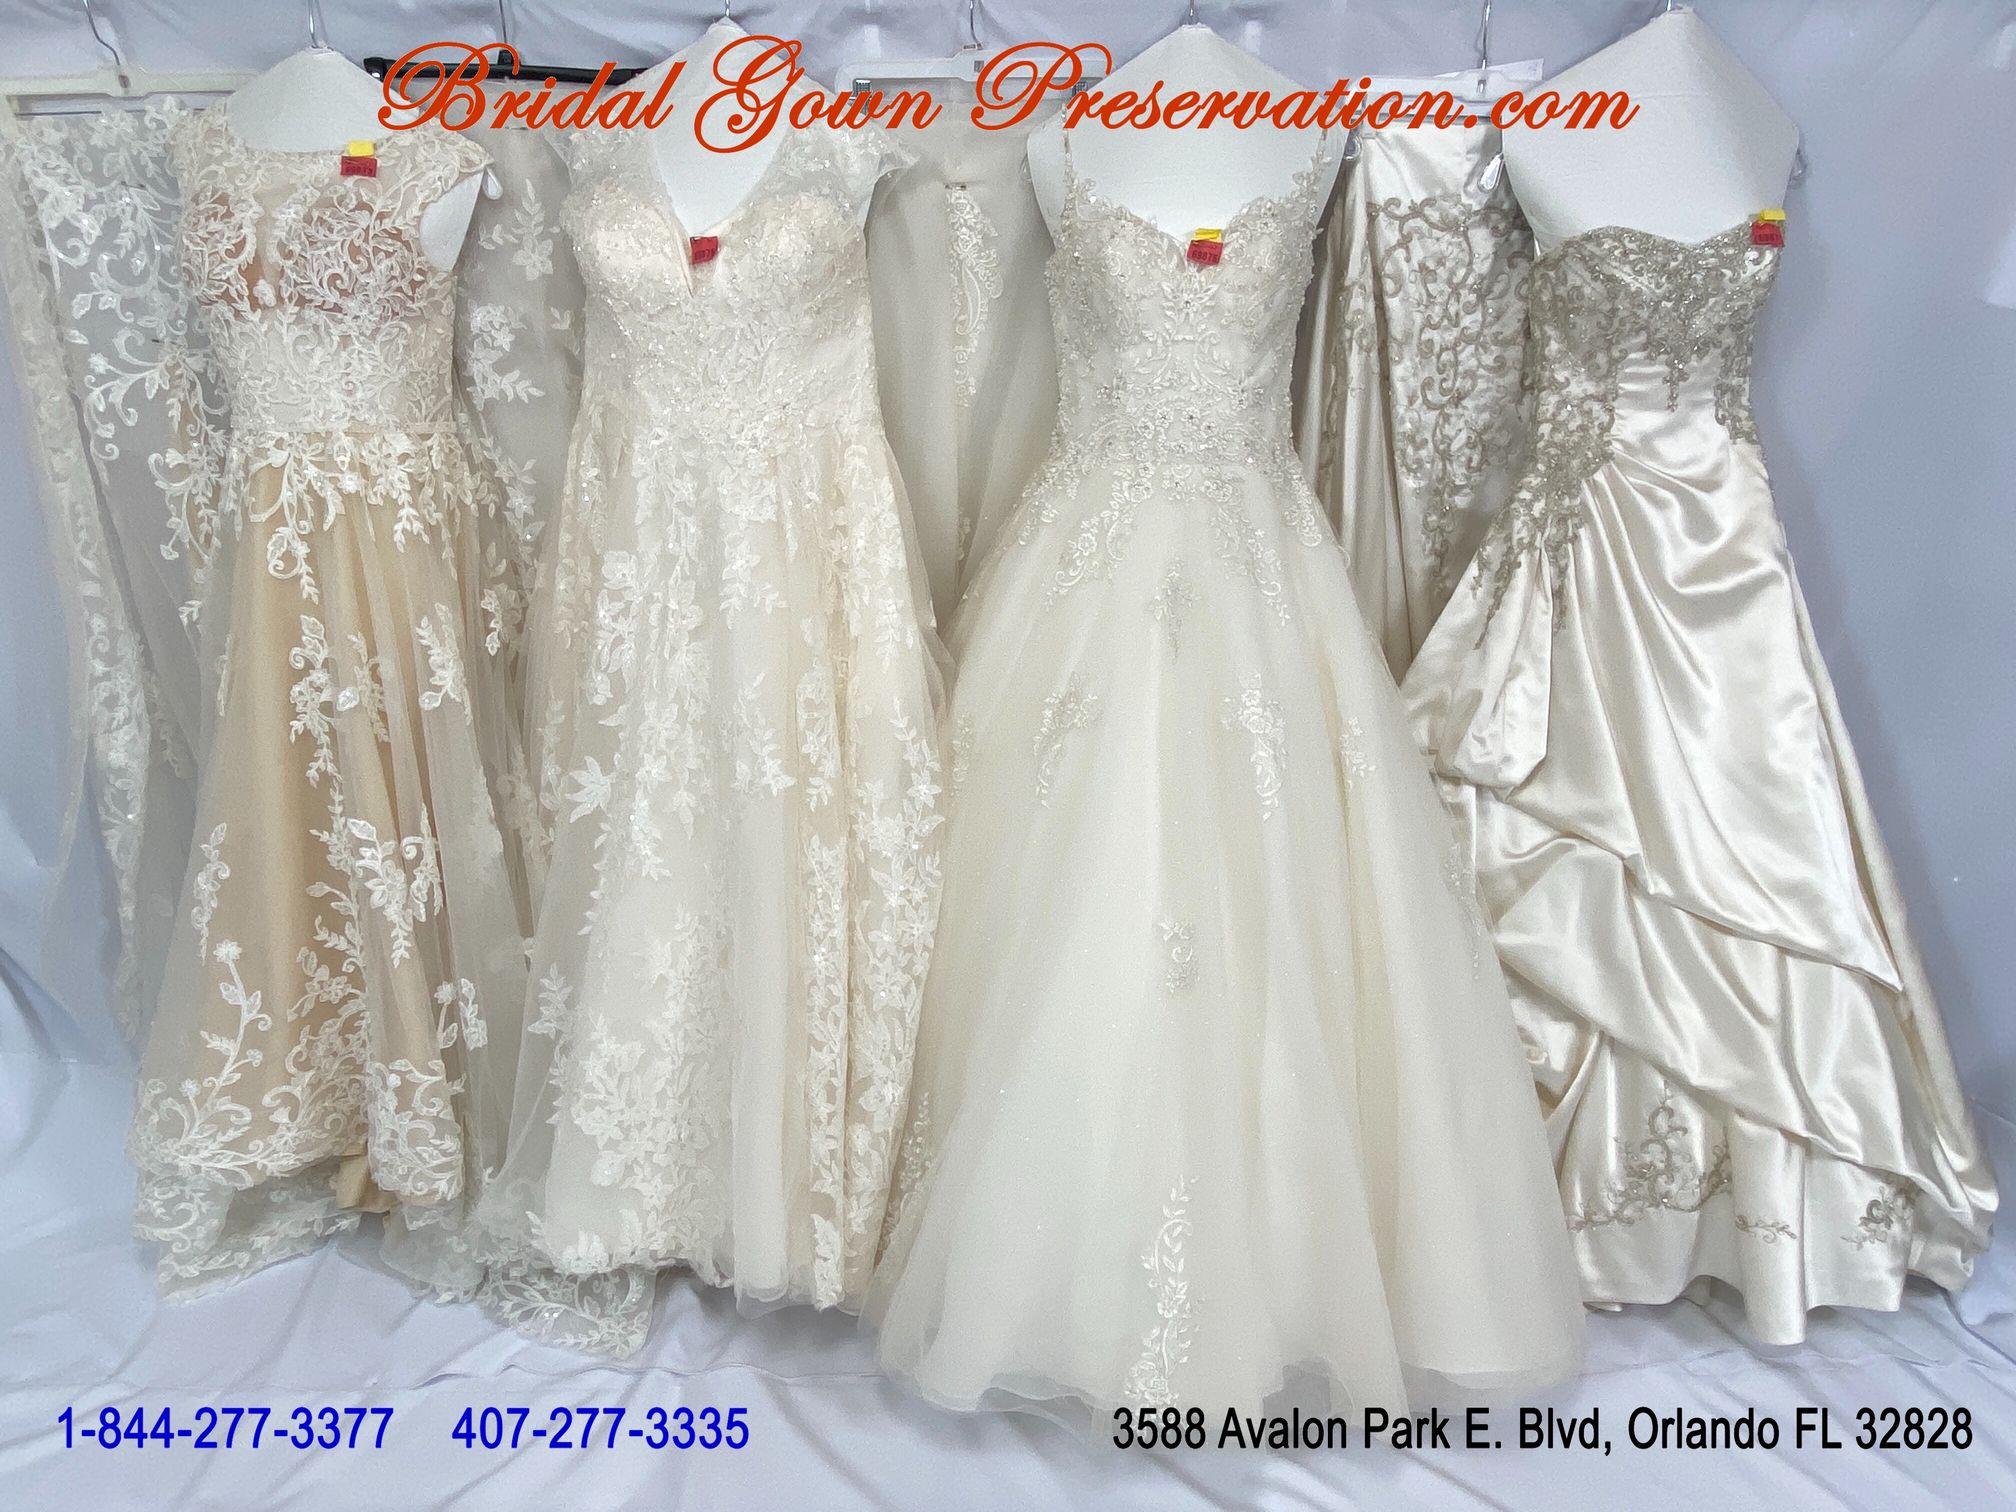 4 Wedding Gowns processed-by BridalGownPreservation.com